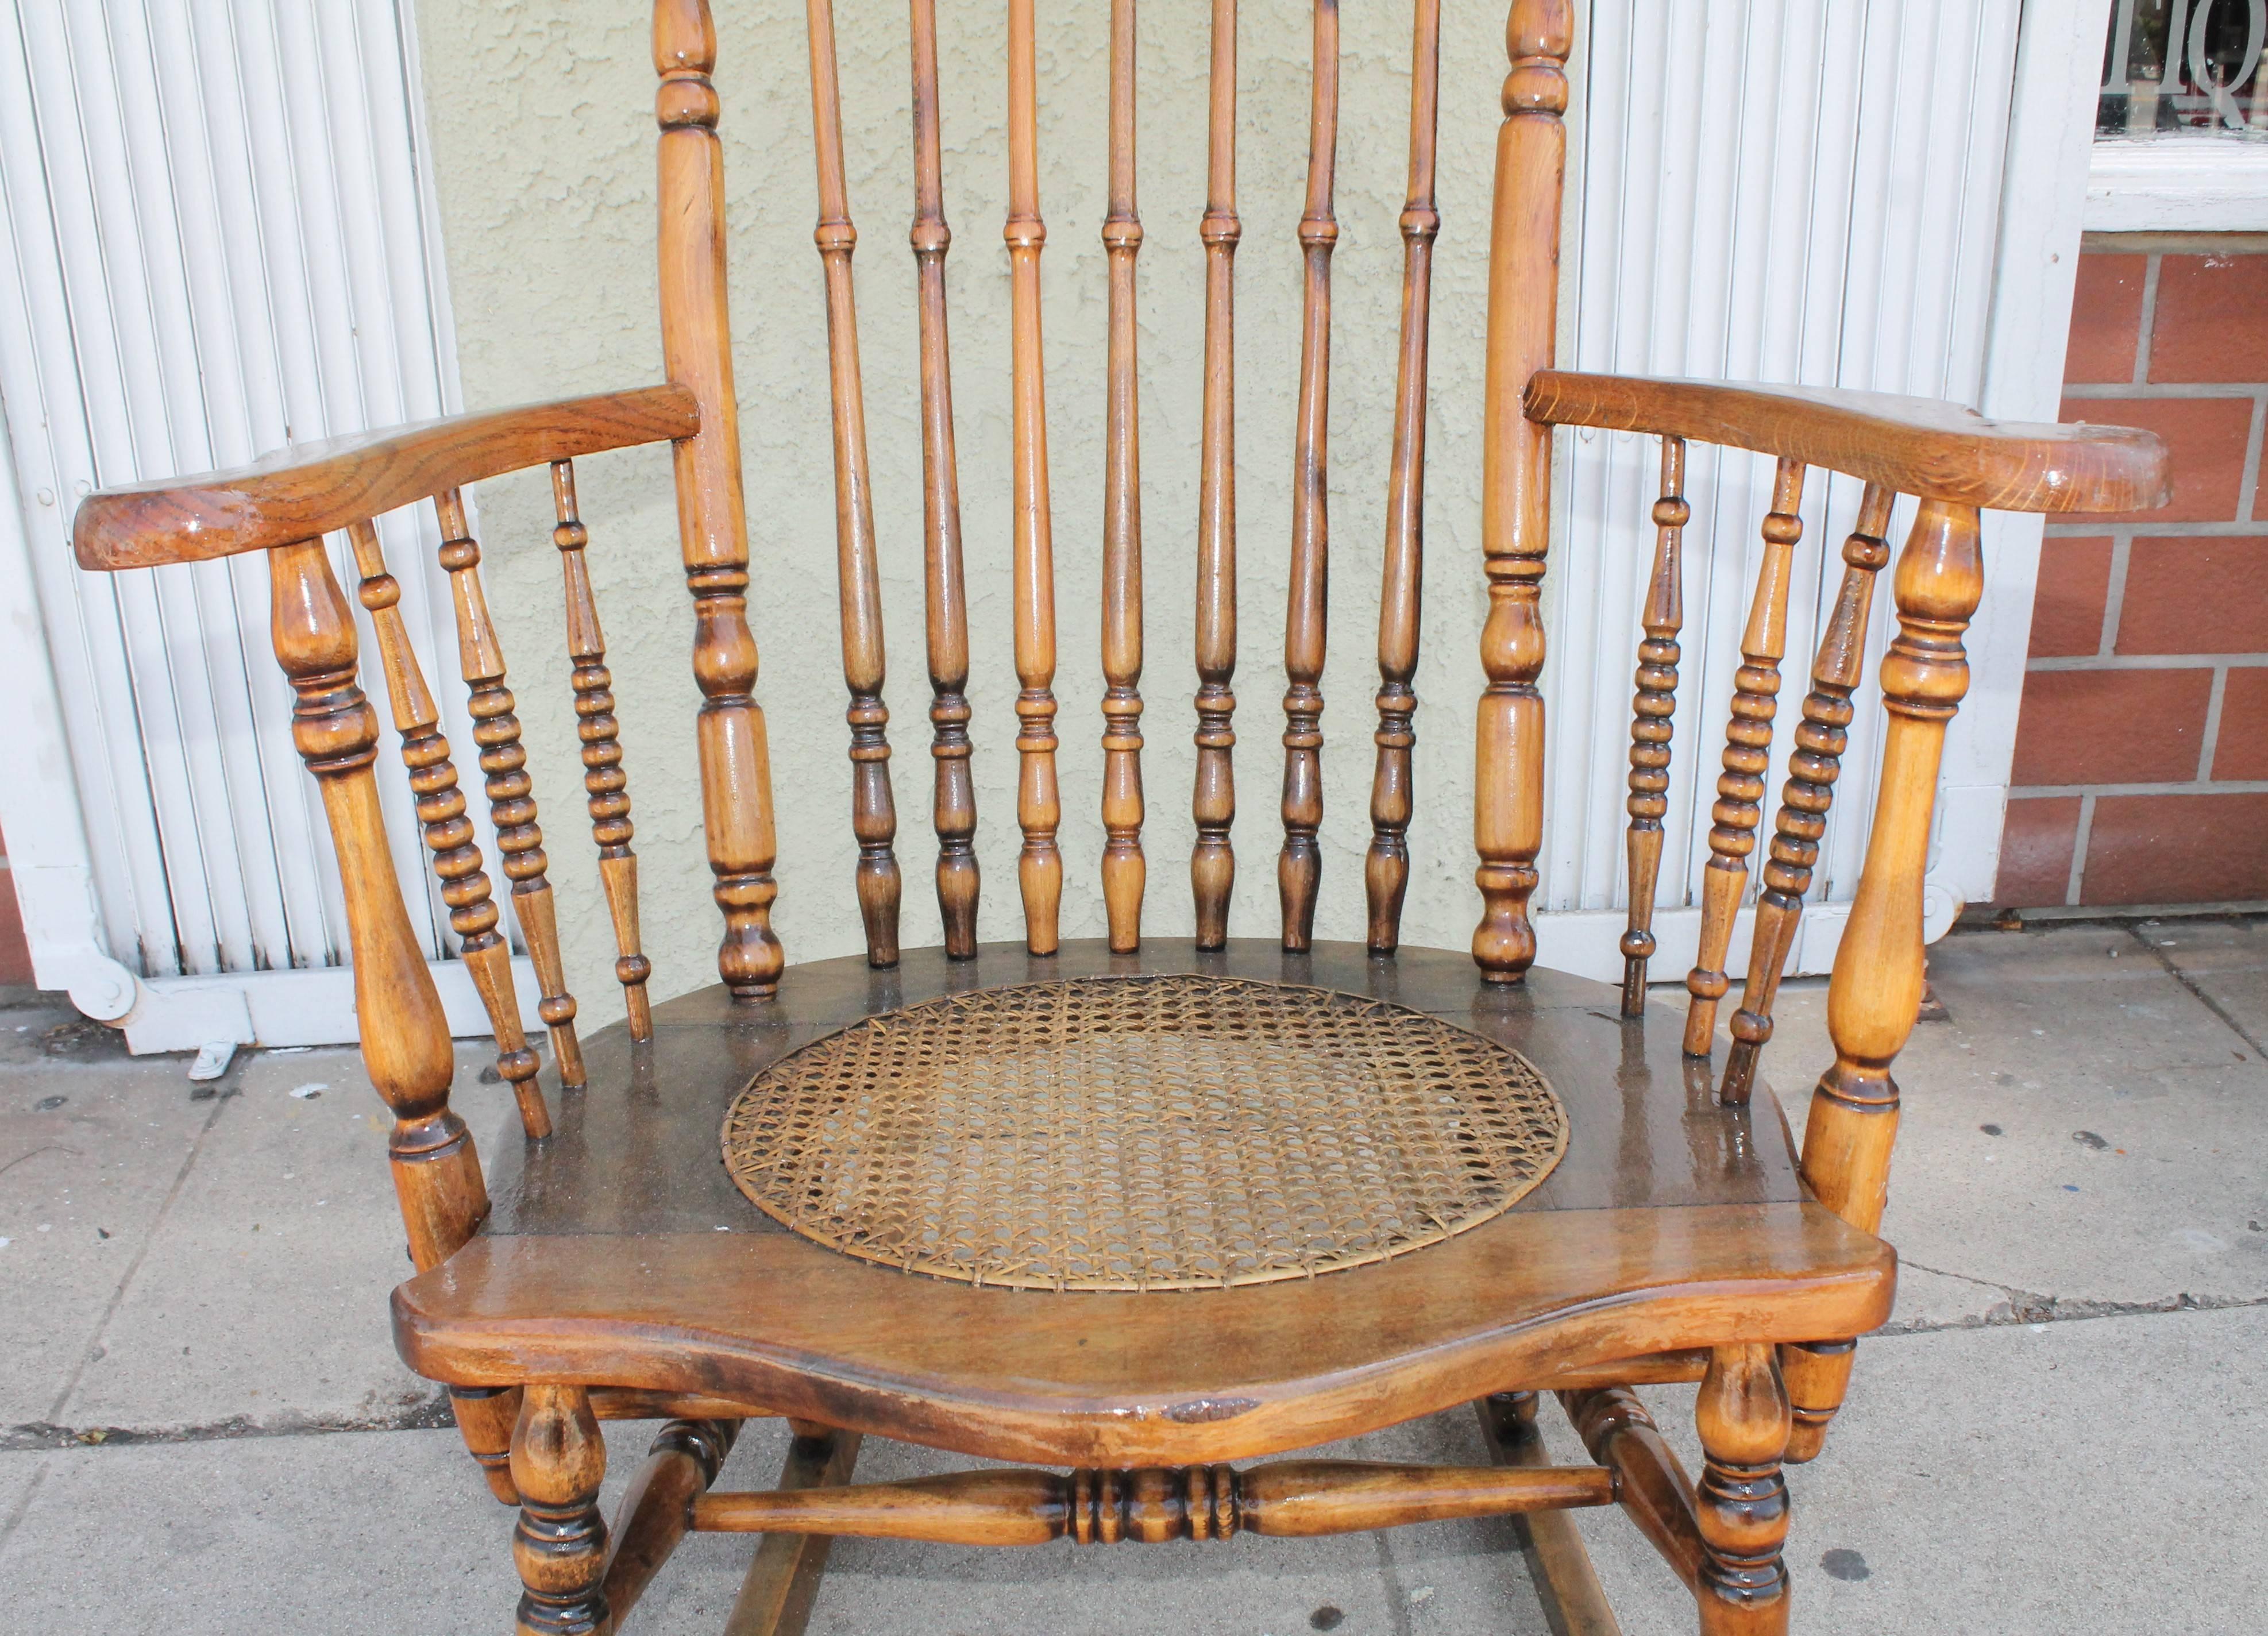 pressed back rocking chair